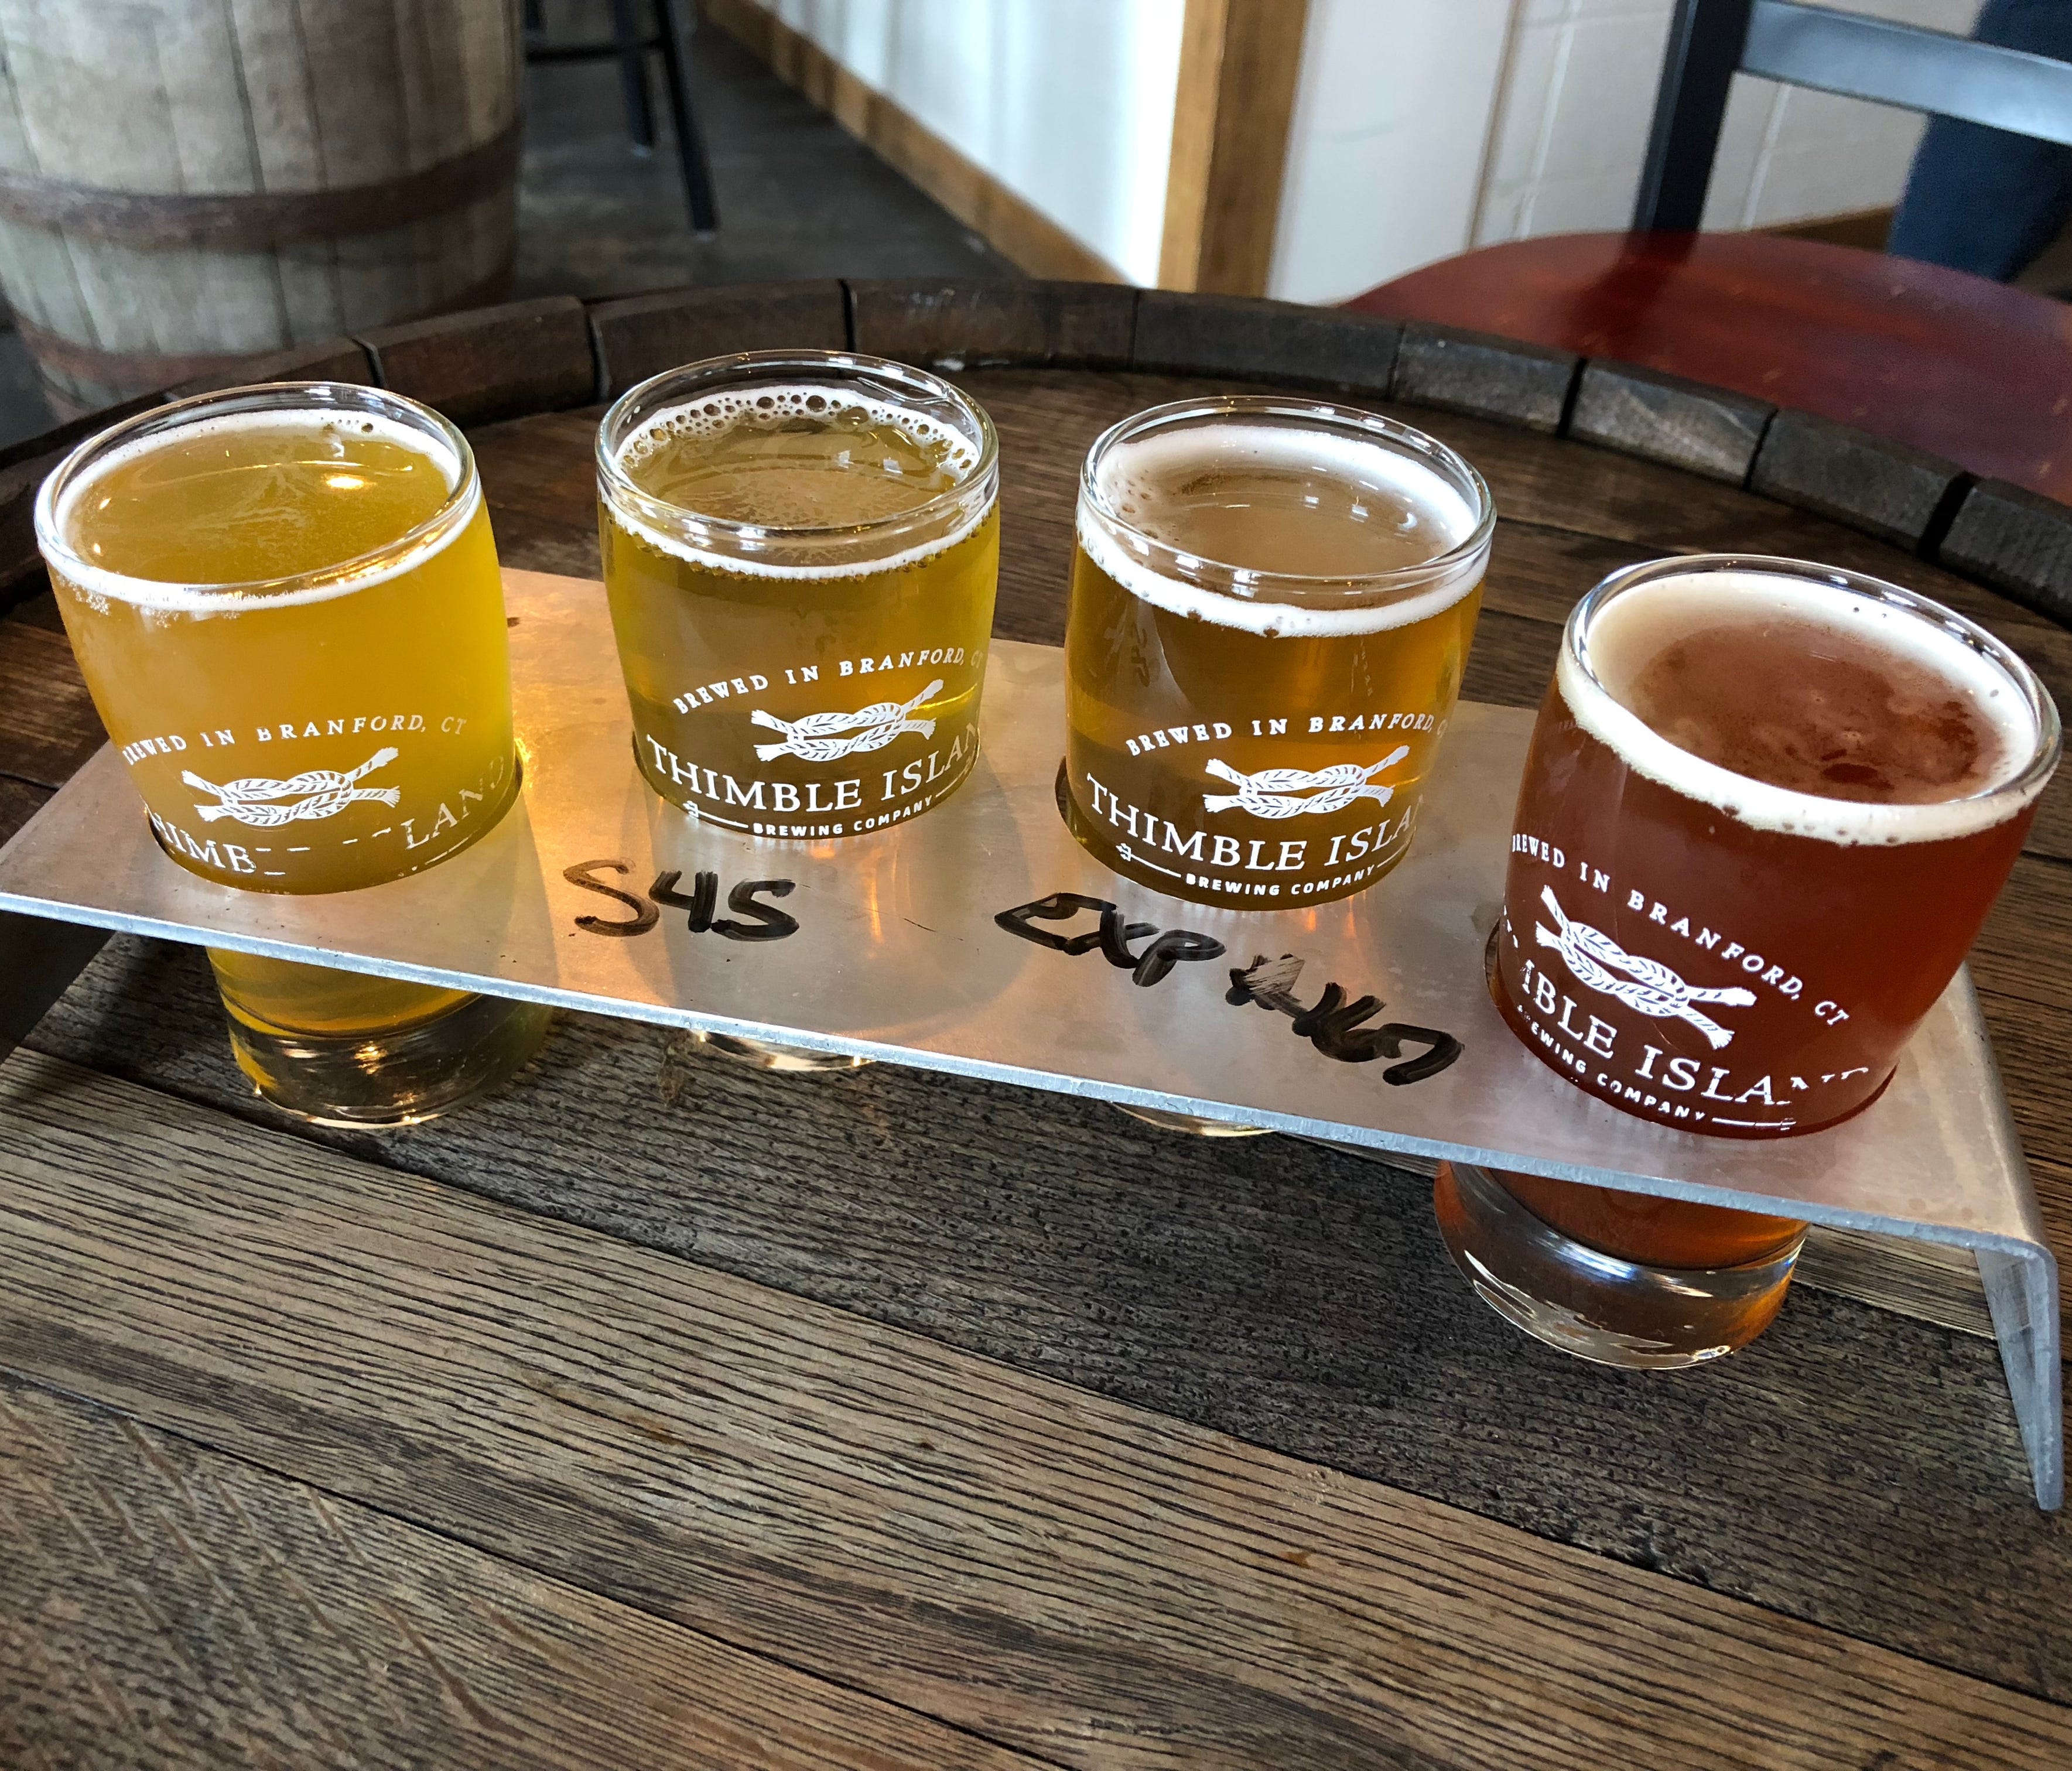 Flights allow visitors to sample their choice of Thimble Islands' beer offerings, from the Ghost Island Double IPA, a bold, crisp brew that's dry-hopped with Citra, to the Session Forty Five IPA, which is made with mosaic hops.